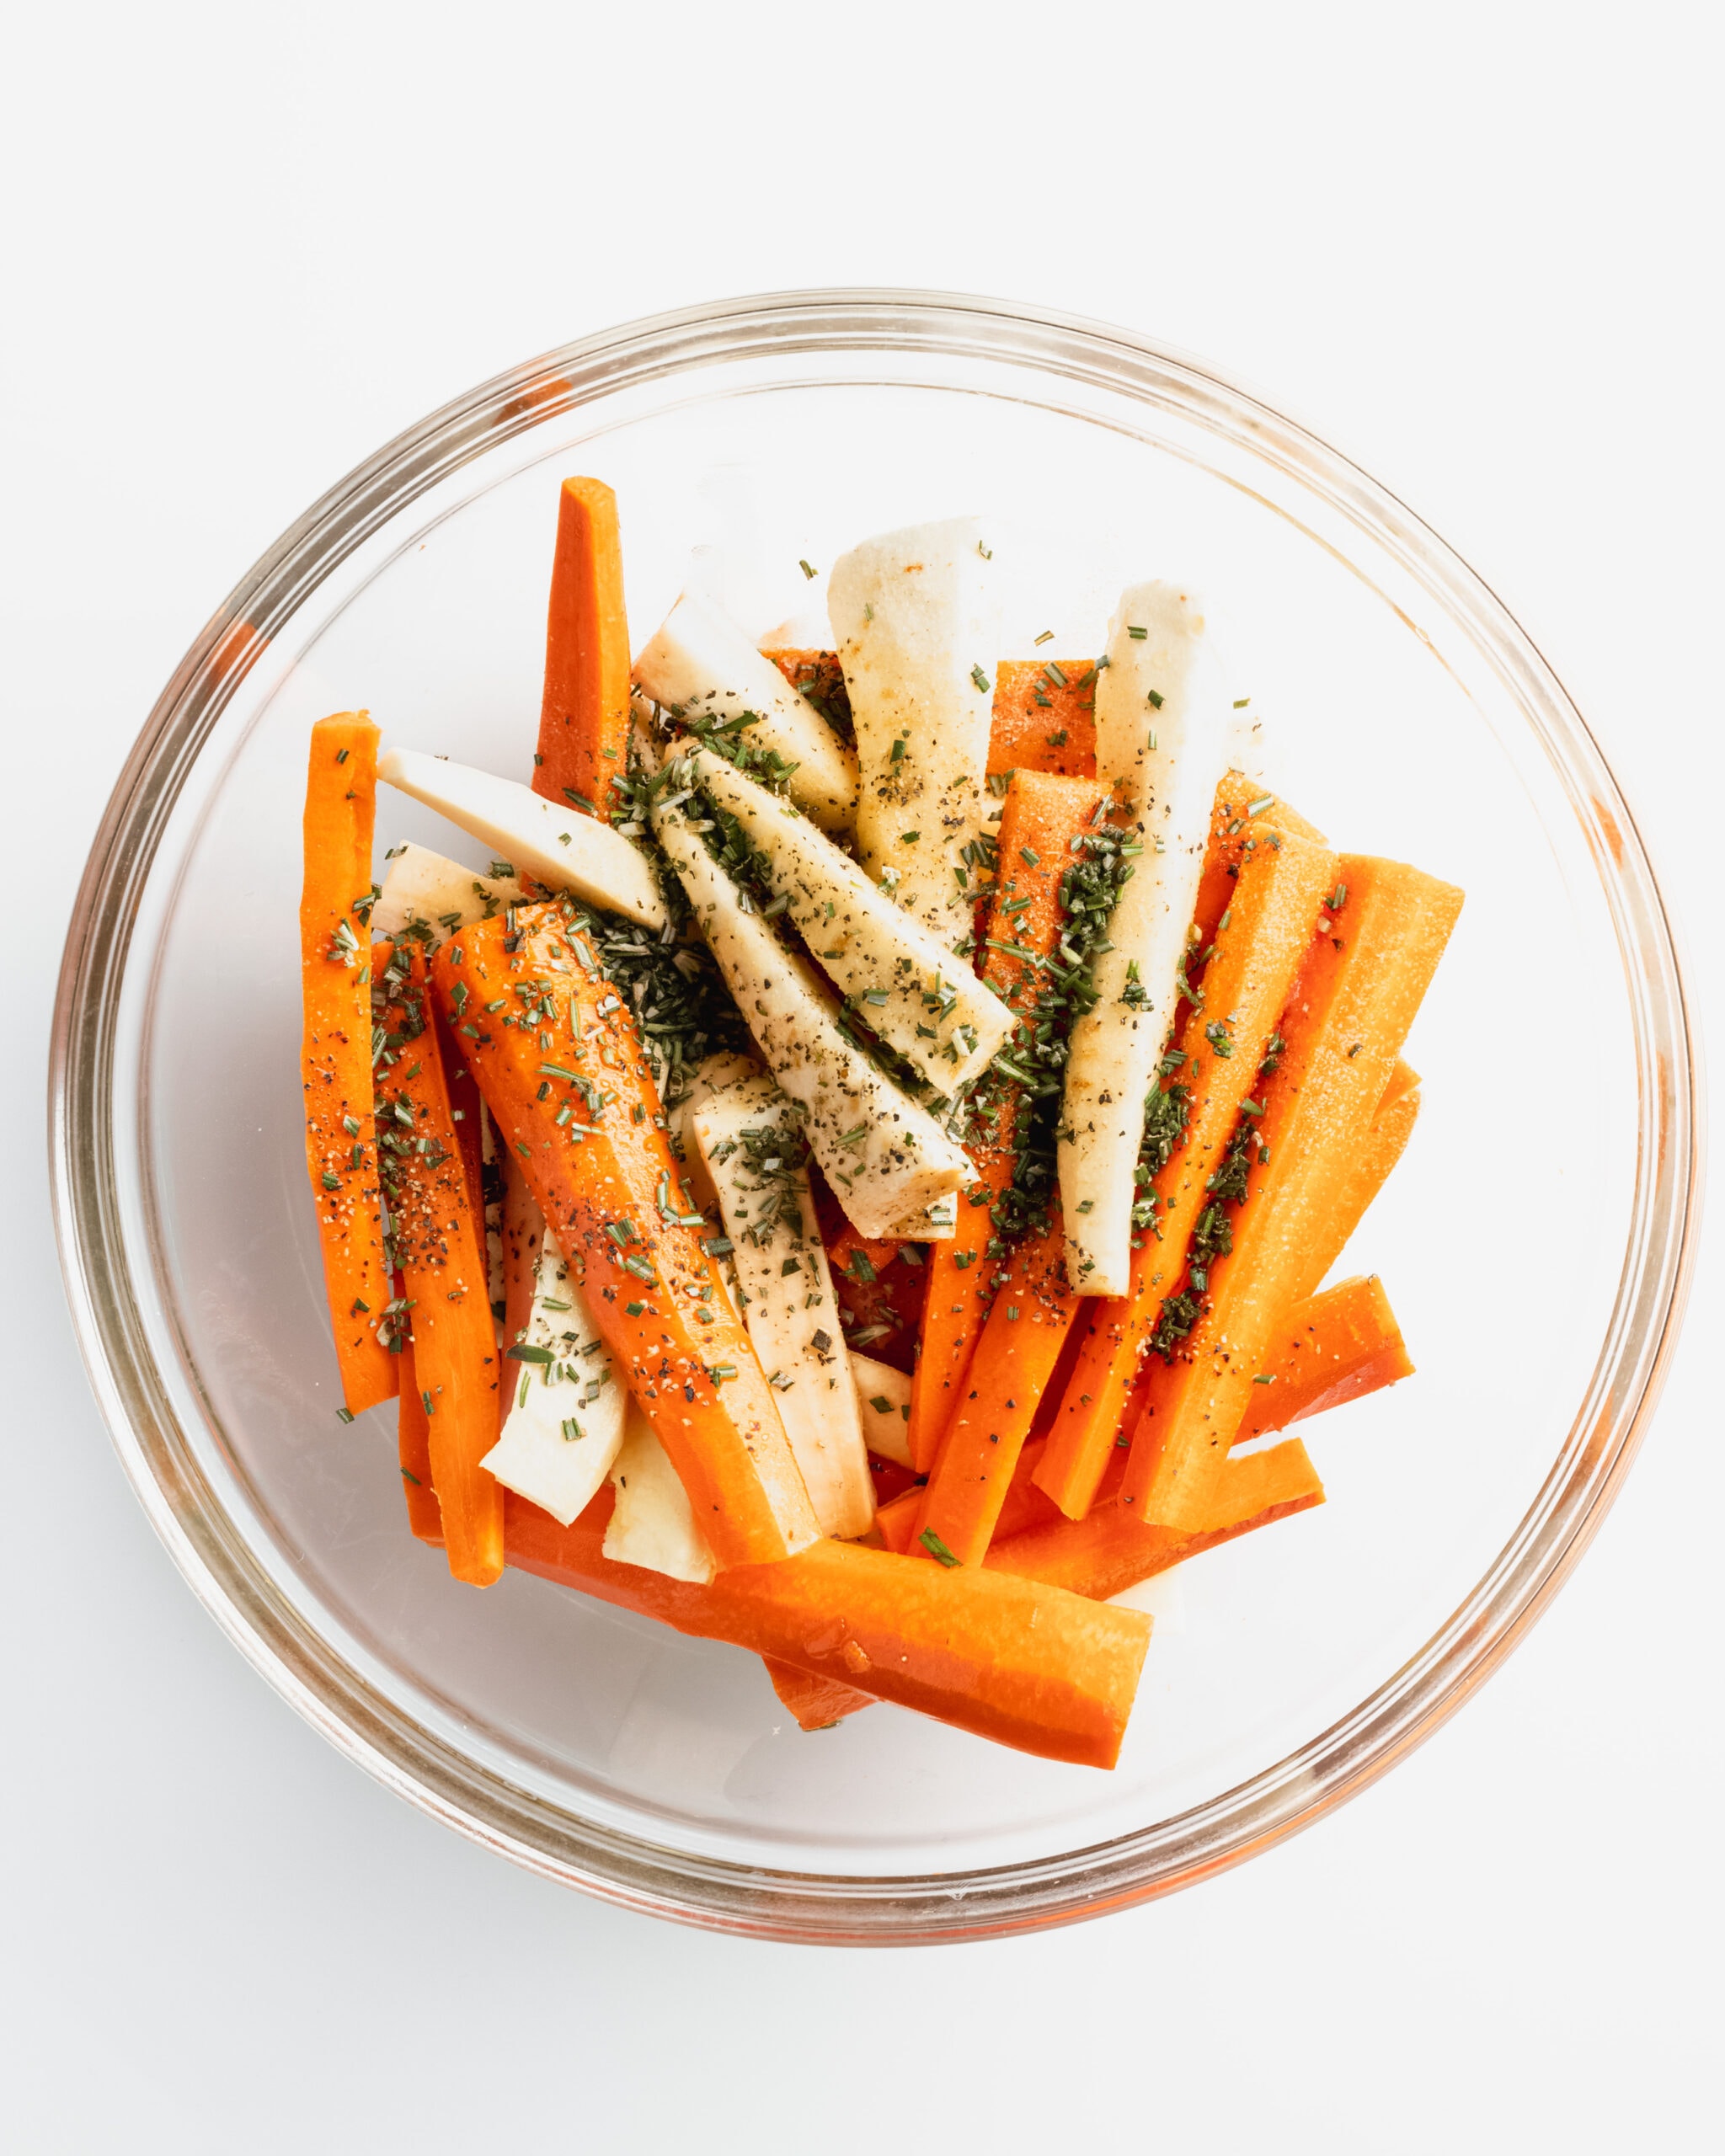 A clear glass bowl with chopped and peeled carrots, parsnips, and fresh herbs. 